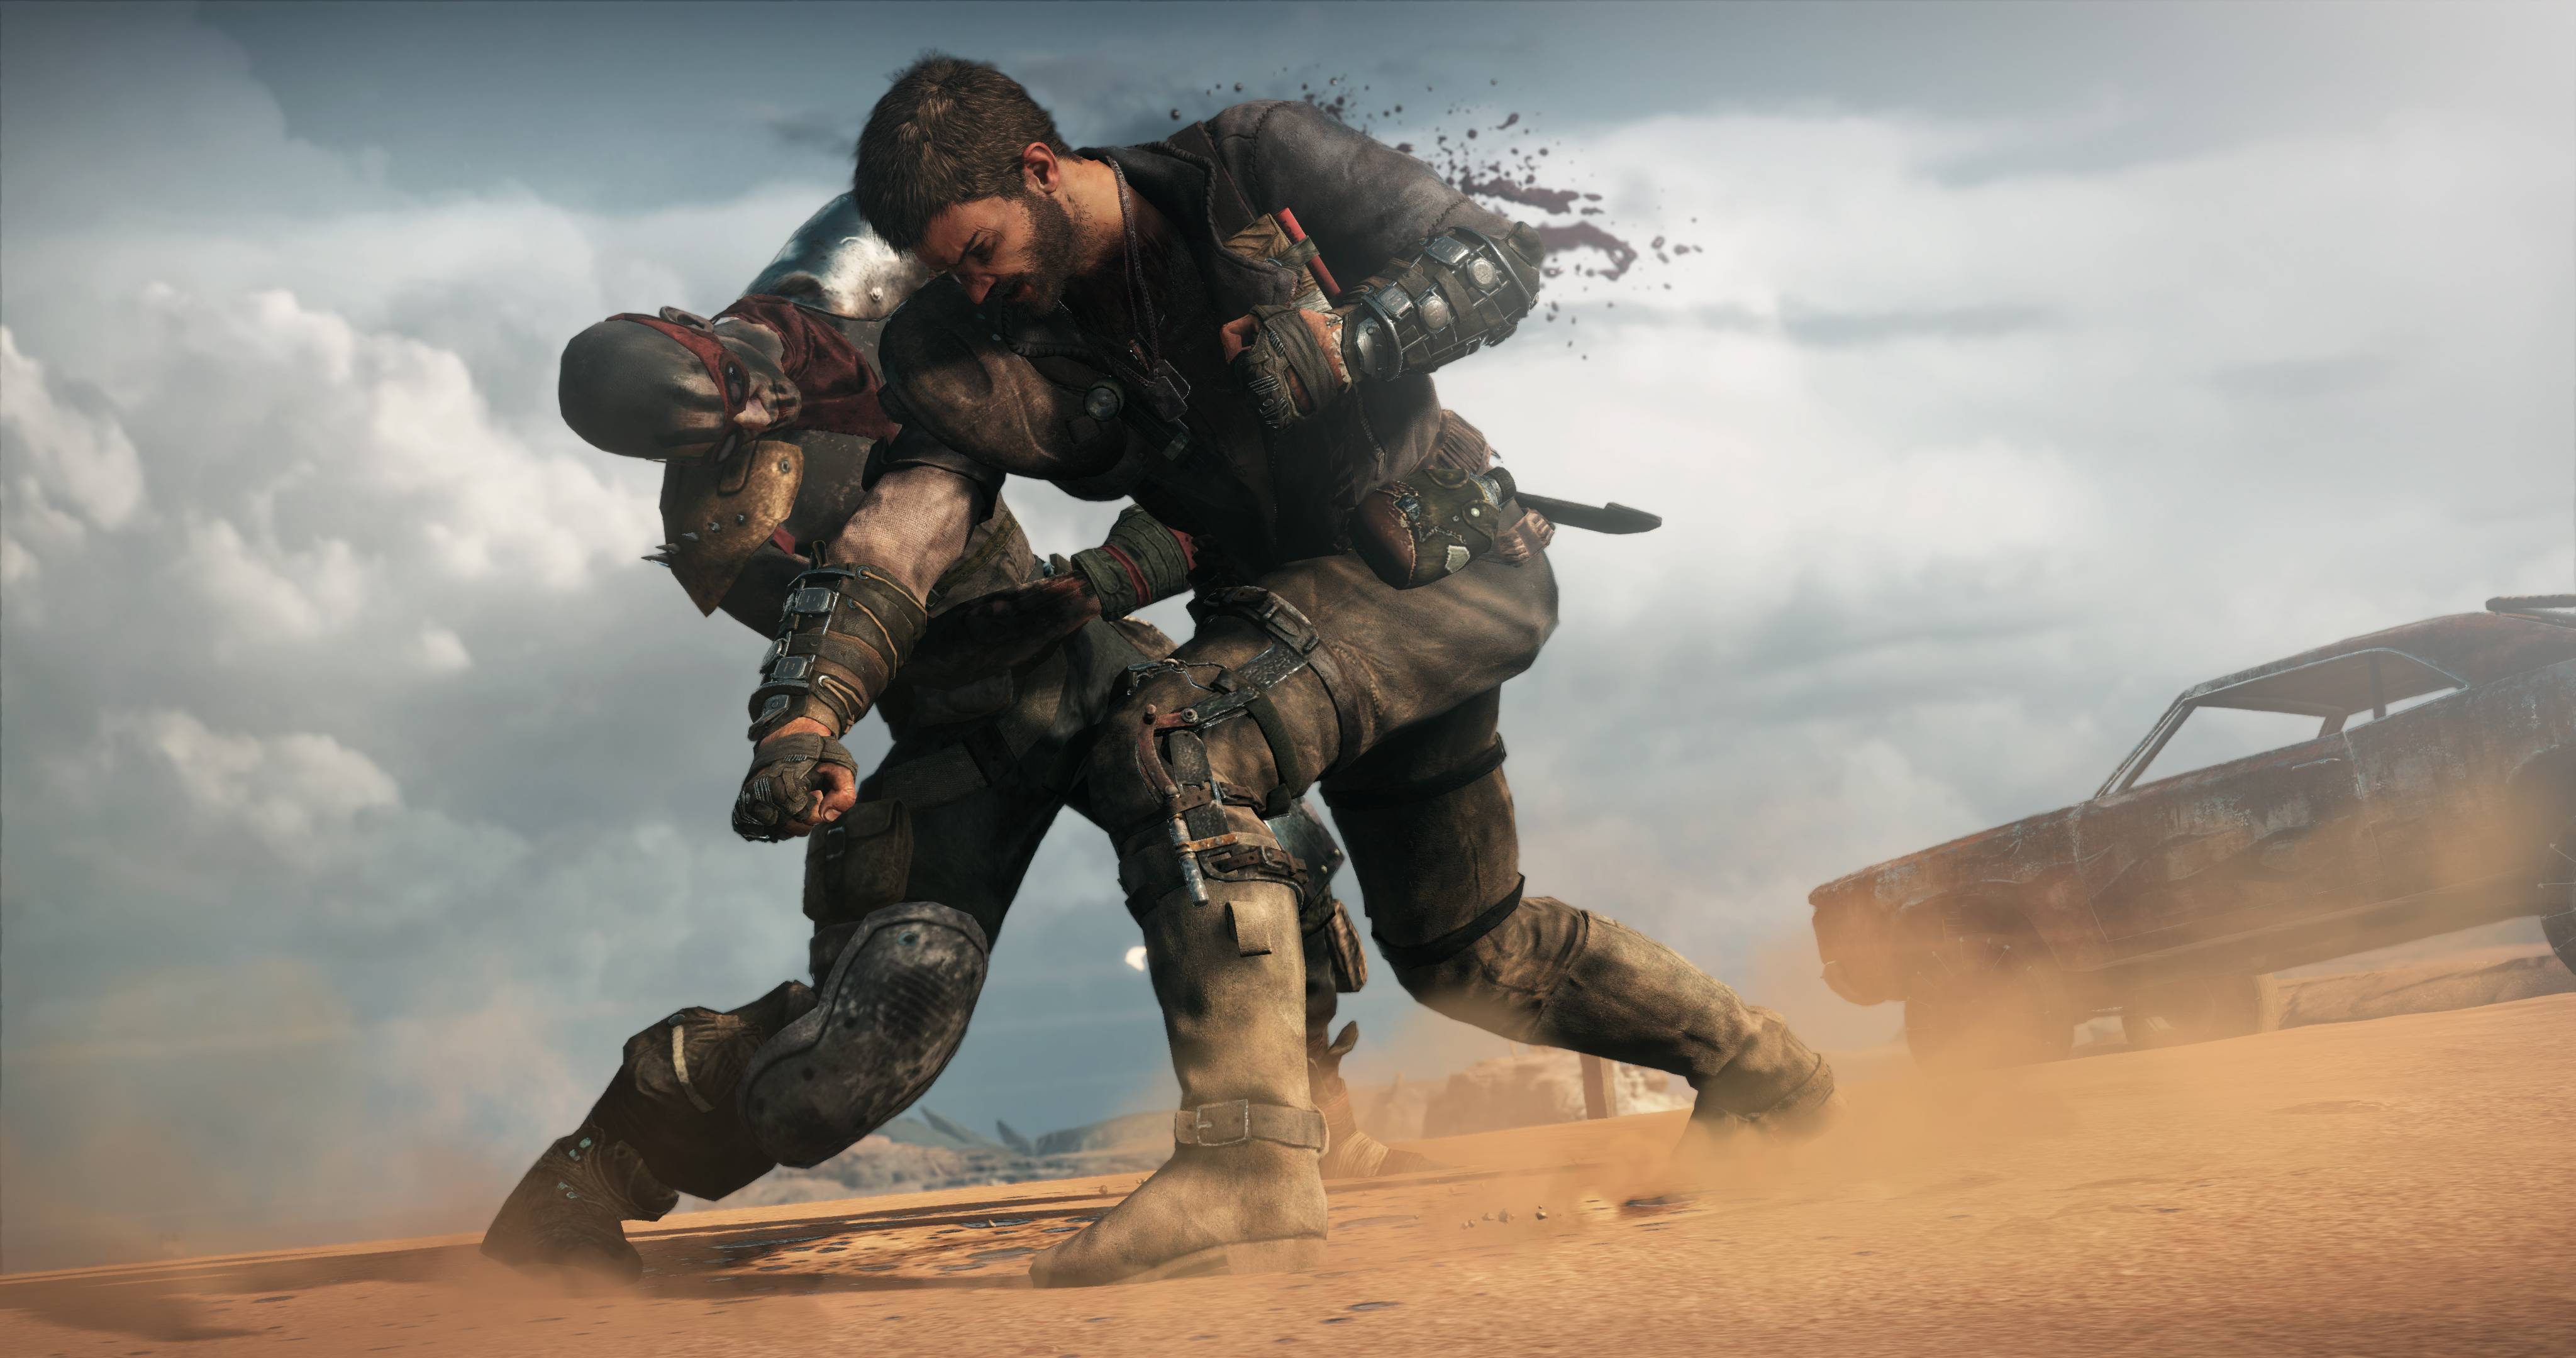 HD wallpaper Mad Max 2015 Mad Max game wallpaper Games men military  armed forces  Wallpaper Flare